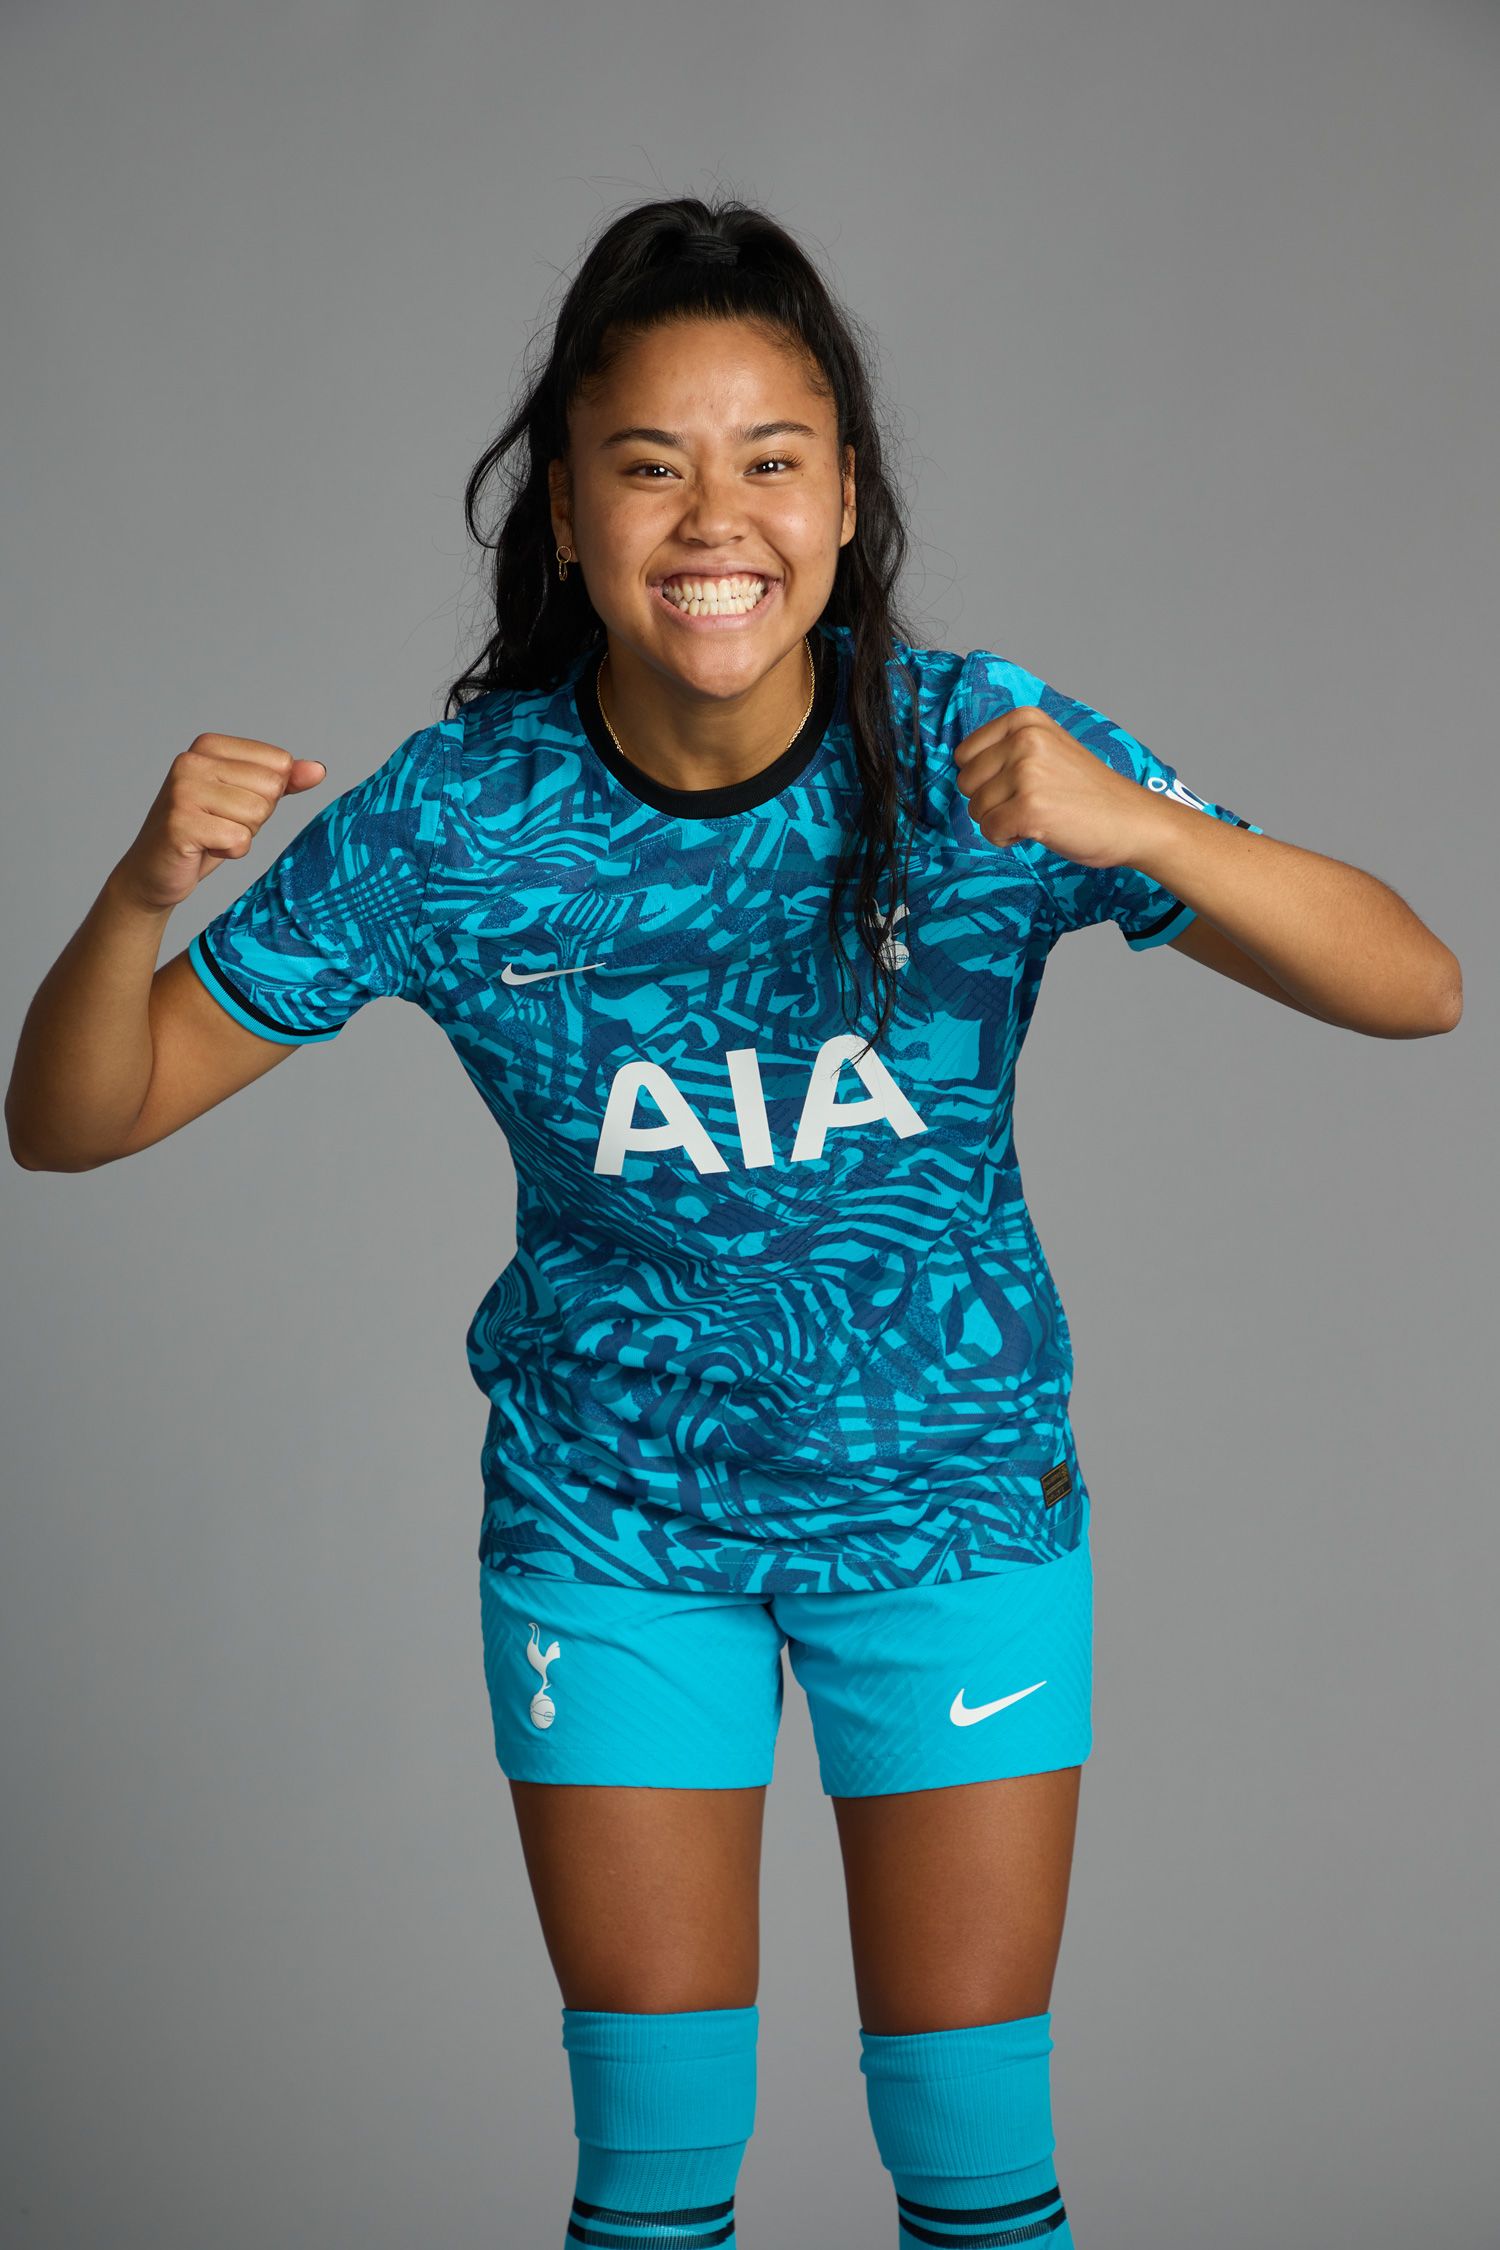 Dare To Do Different – 2022/23 Nike Third Kit unveiled